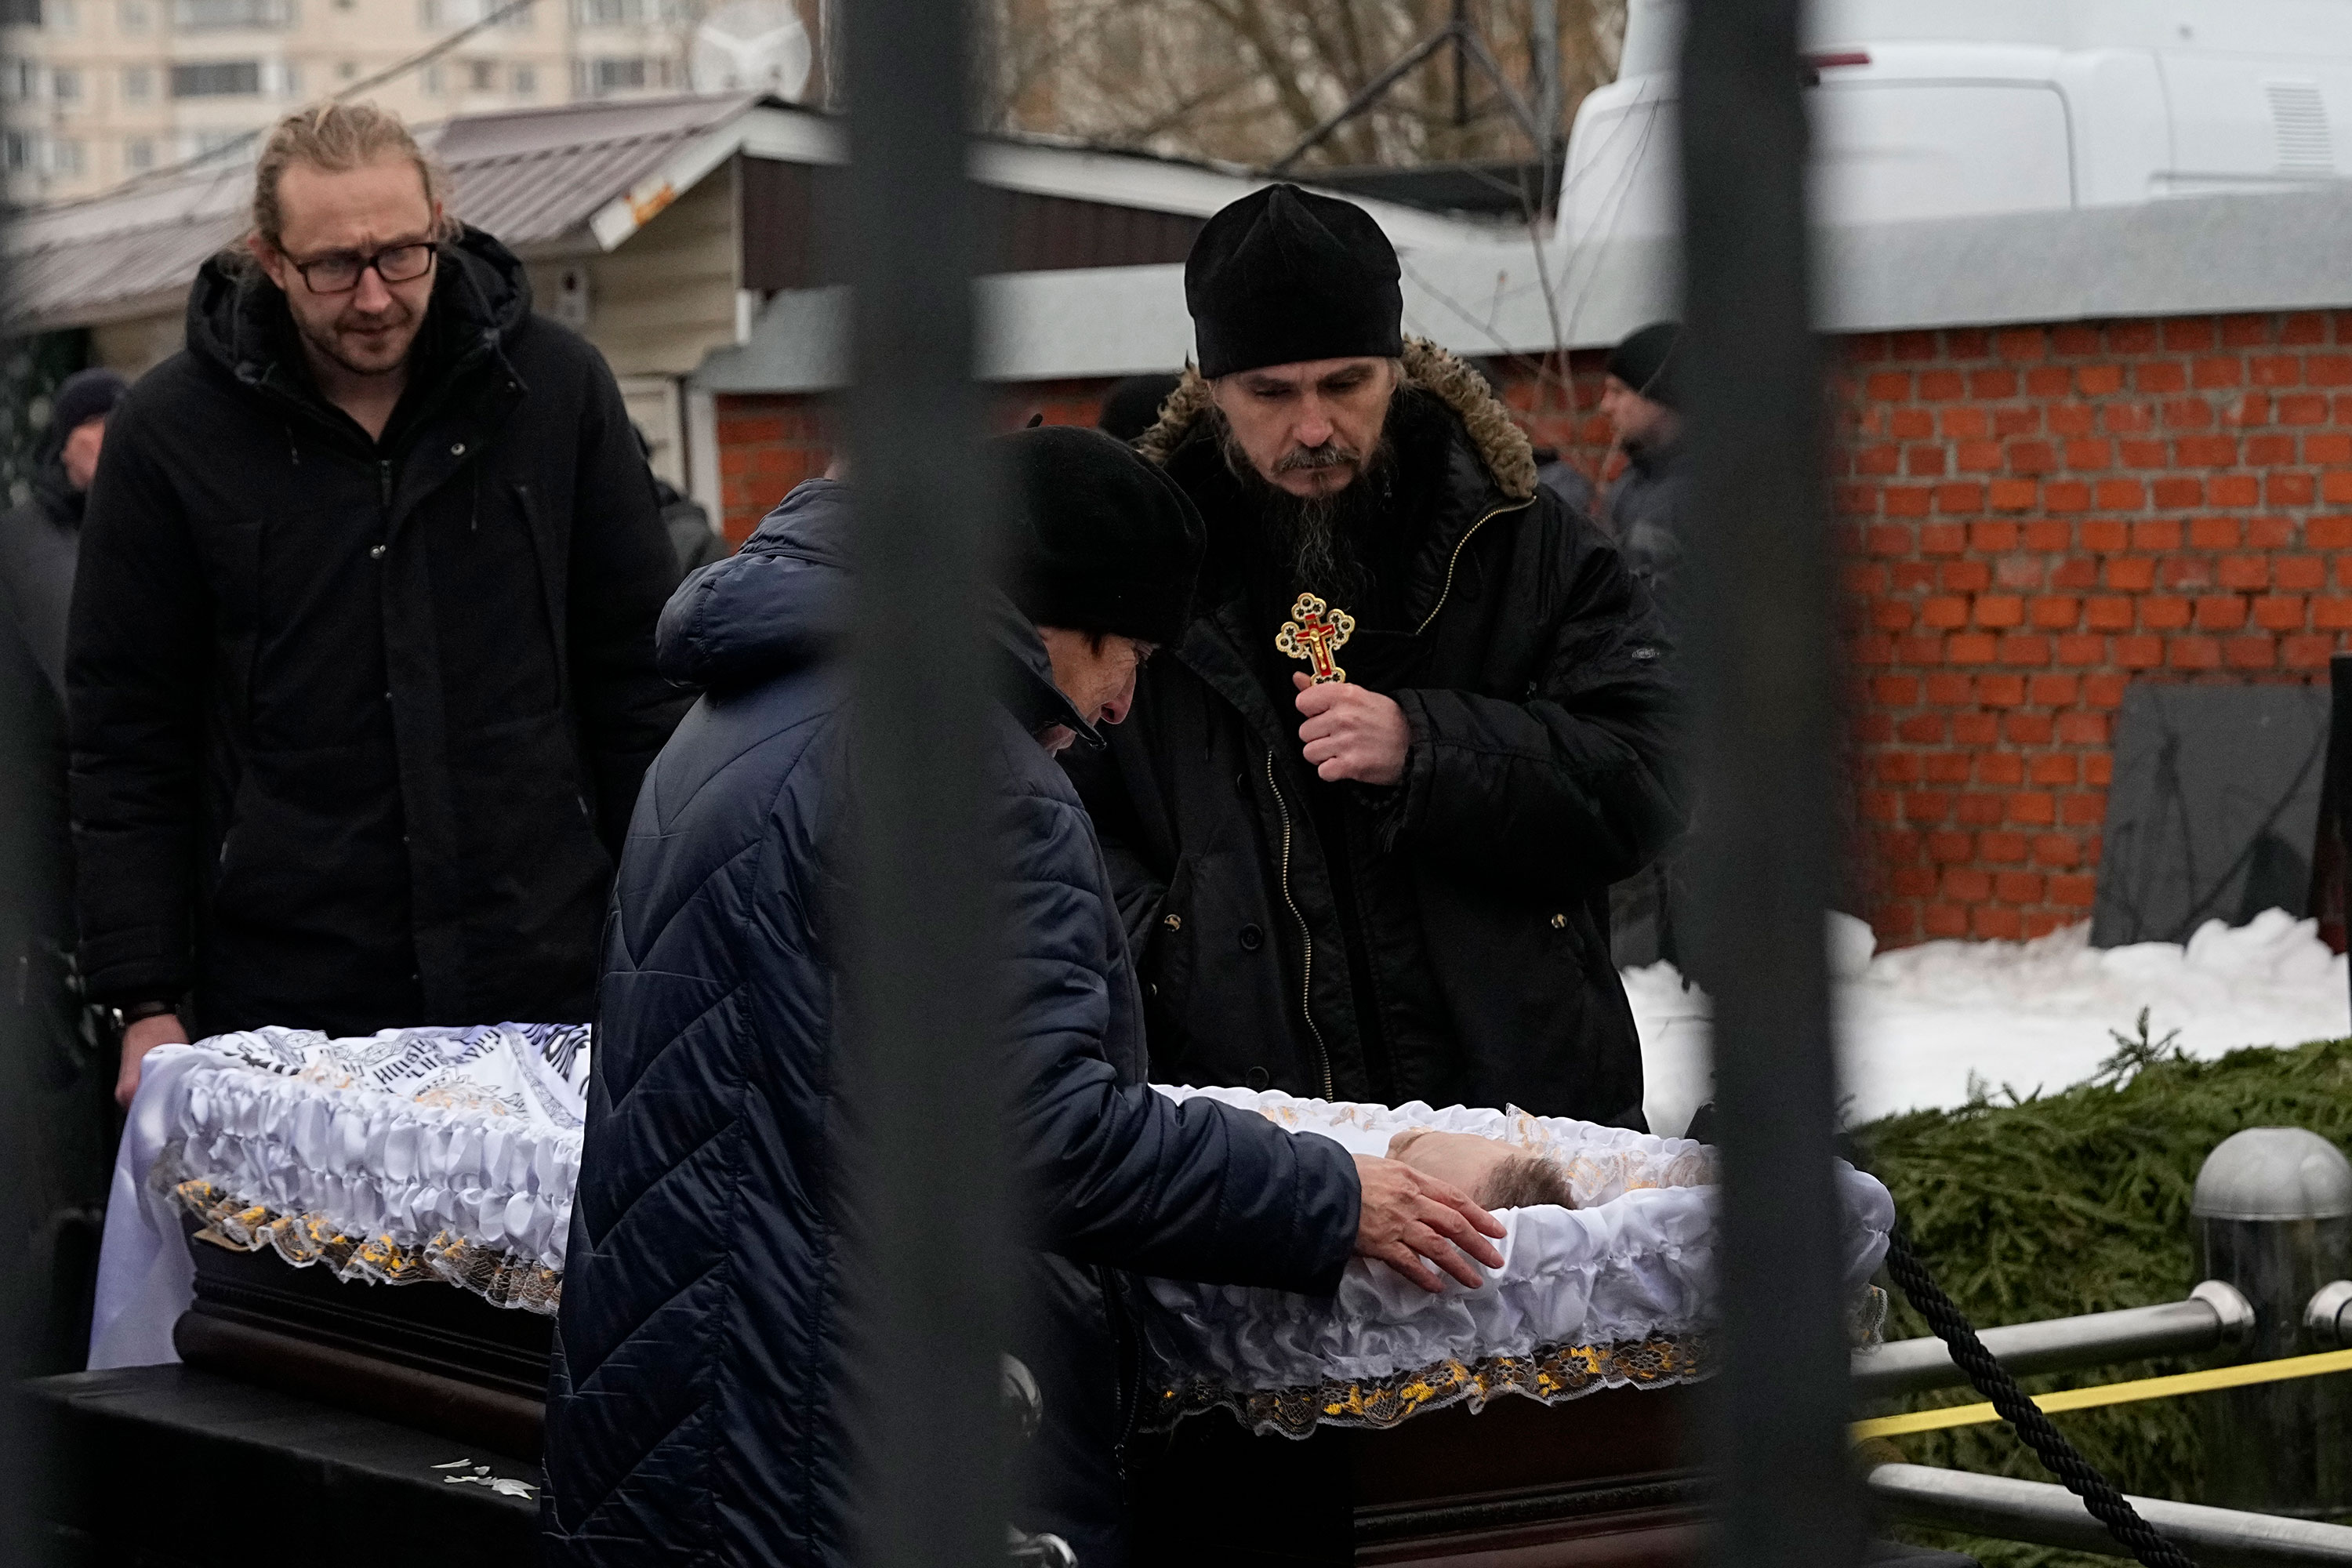 People pay their last respects as the open casket Alexey Navalny is placed next to the burial site at the Borisovsky cemetery in Moscow on Friday.